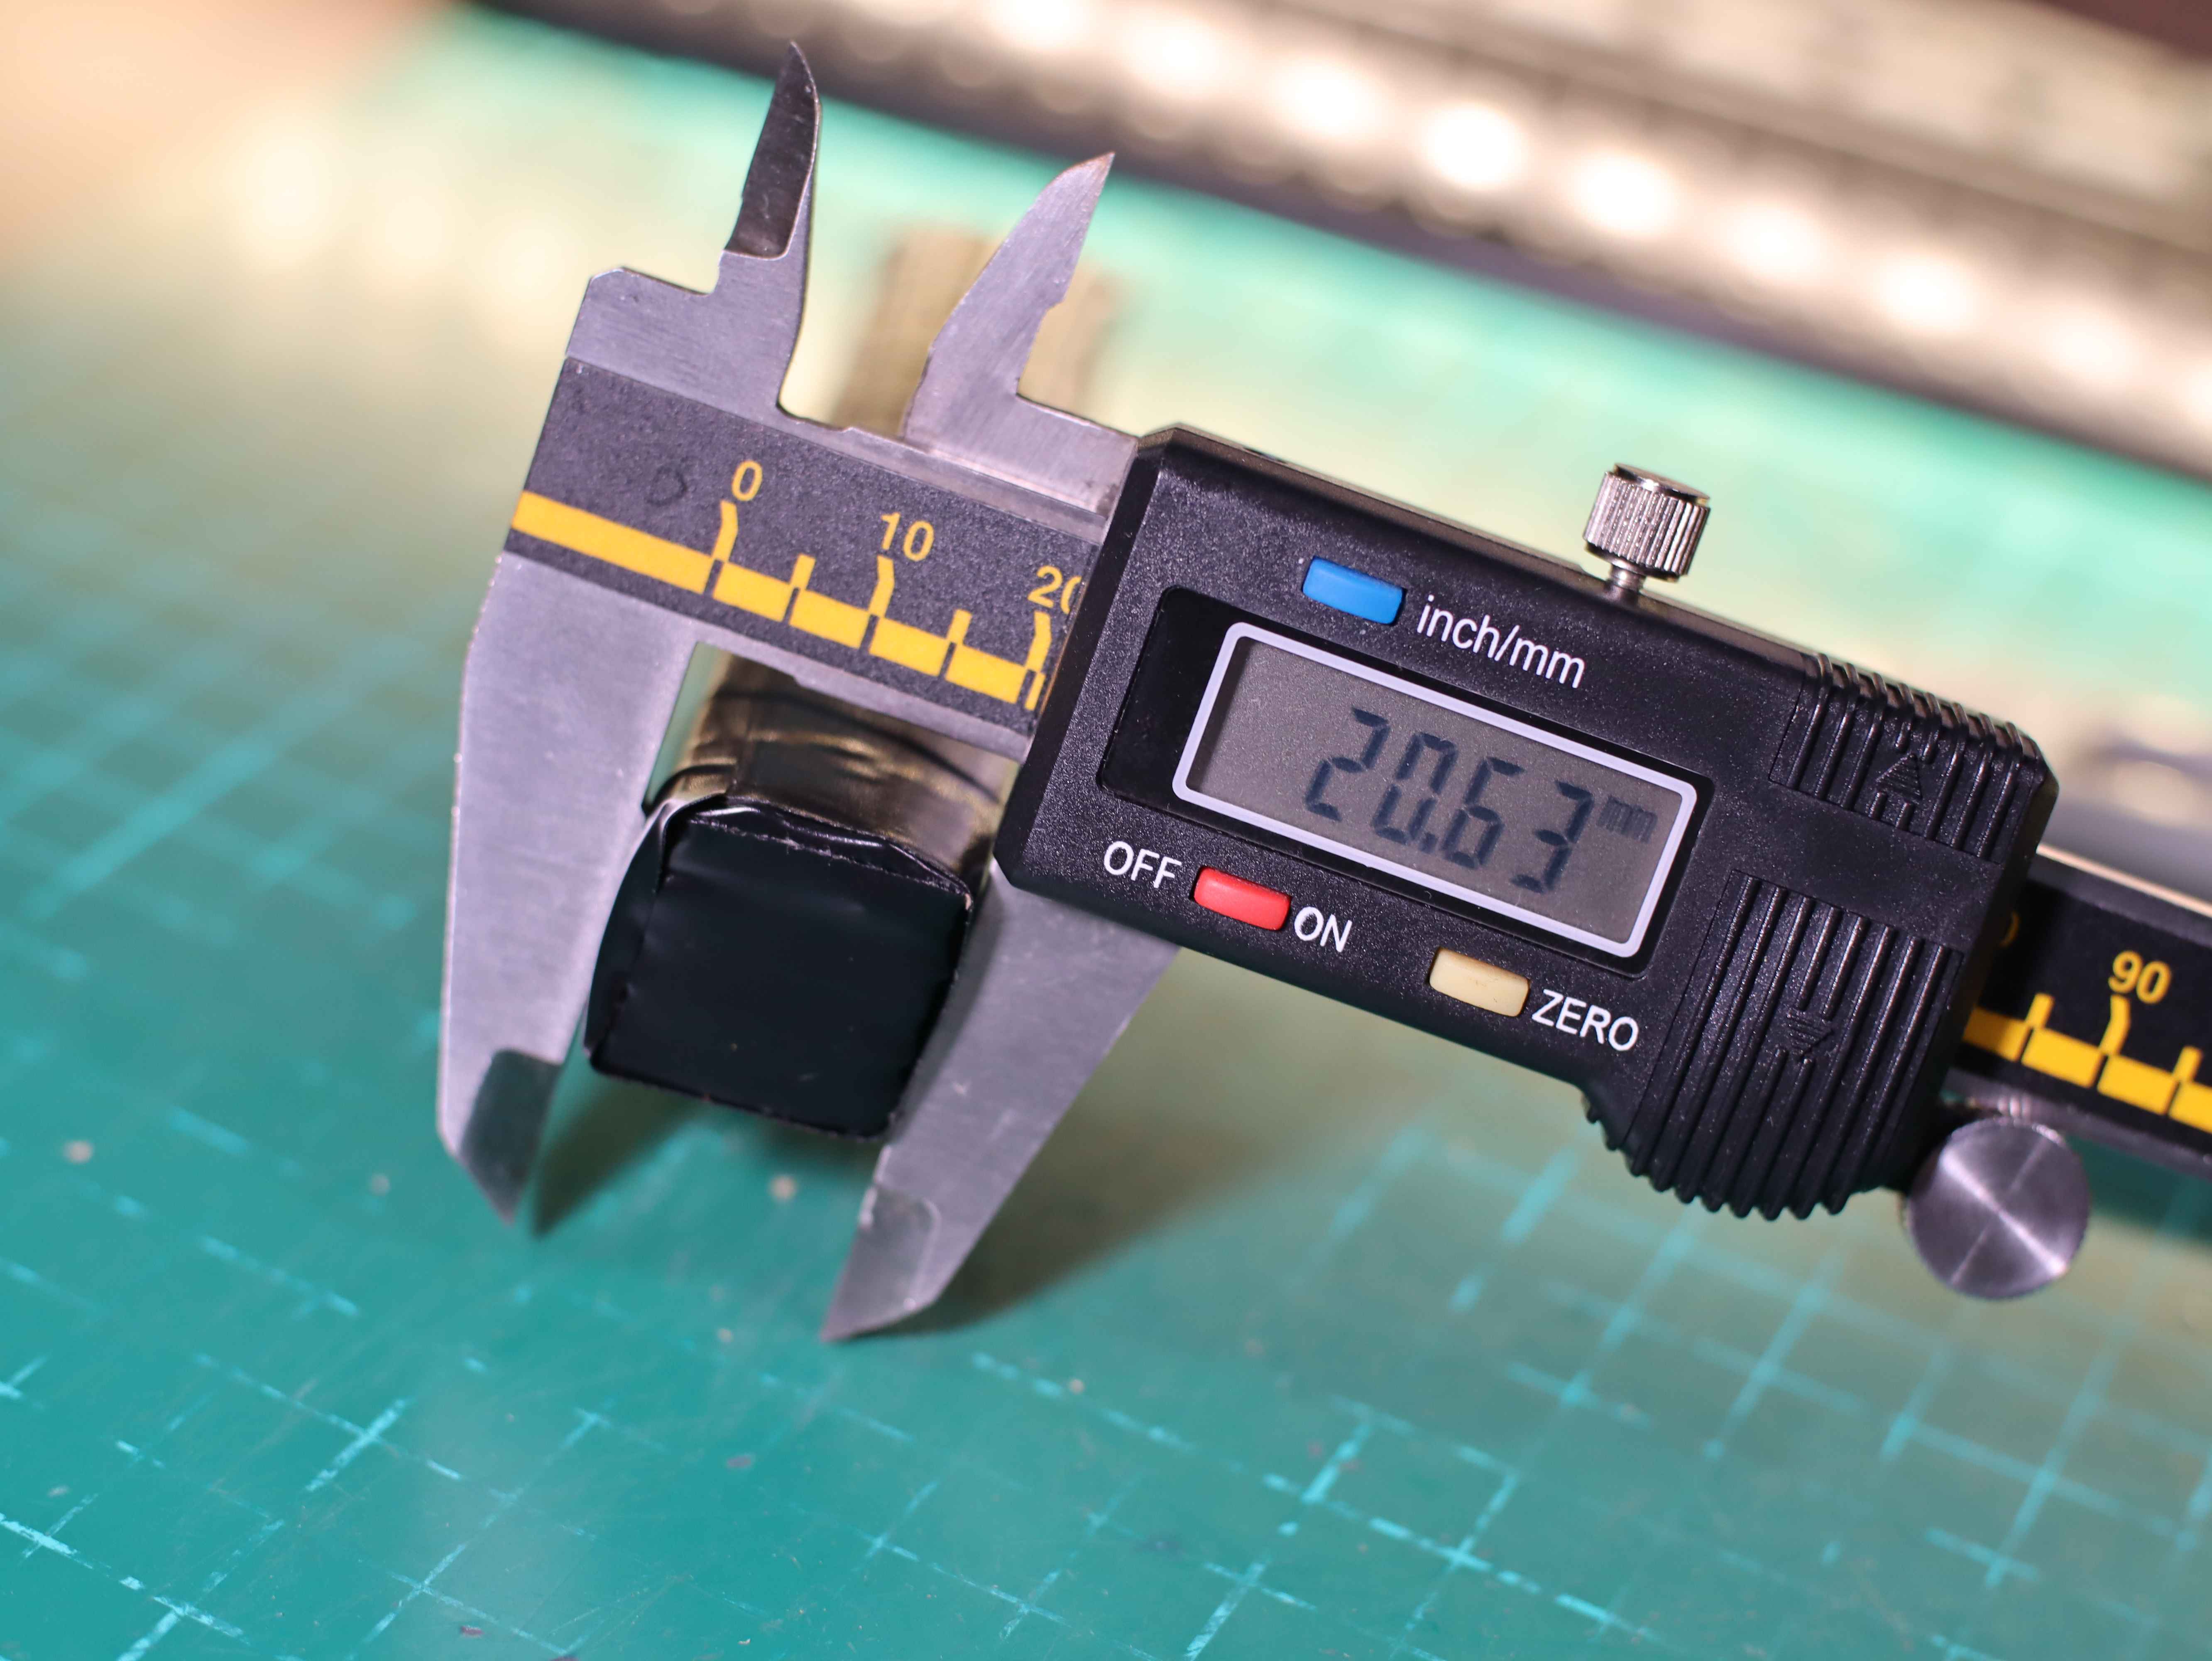 Re-measure the thickness of the battery from the cardboard. Electronic caliper and model covered with insulating tape.